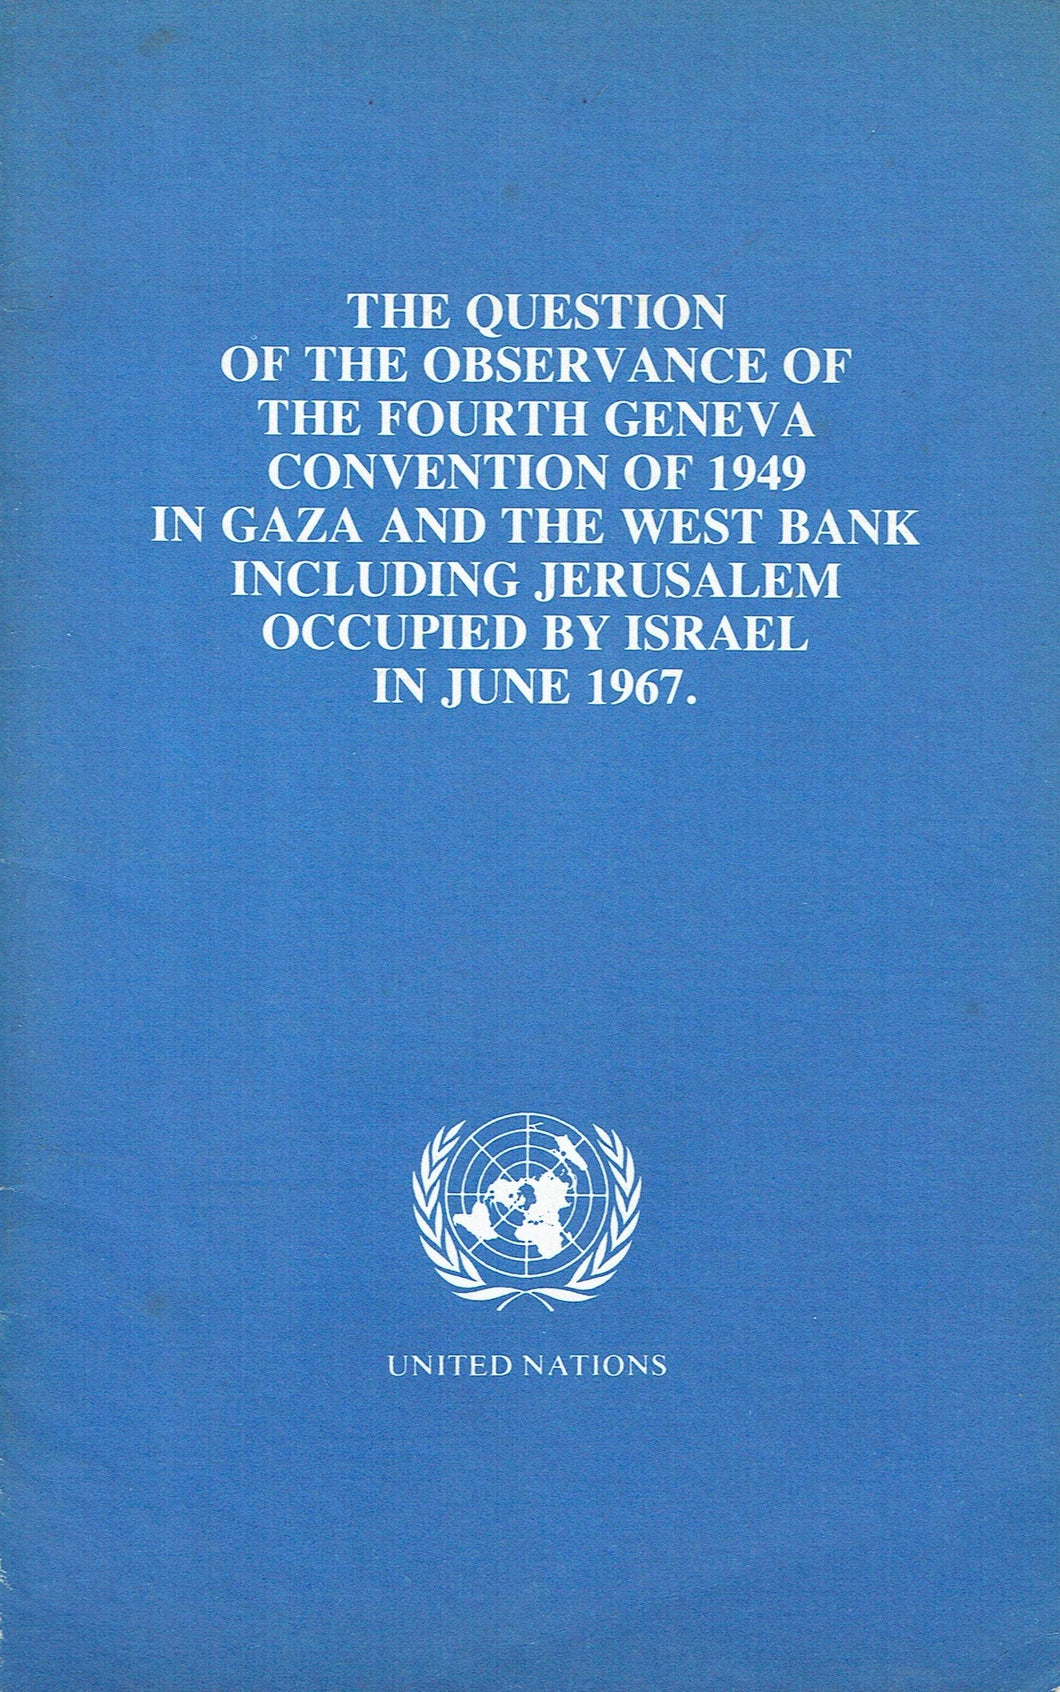 The Question of the Observance of the Fourth Geneva Convention of 1949 in Gaza and the West Bank including Jerusalem Occupied by Israel in June 1967